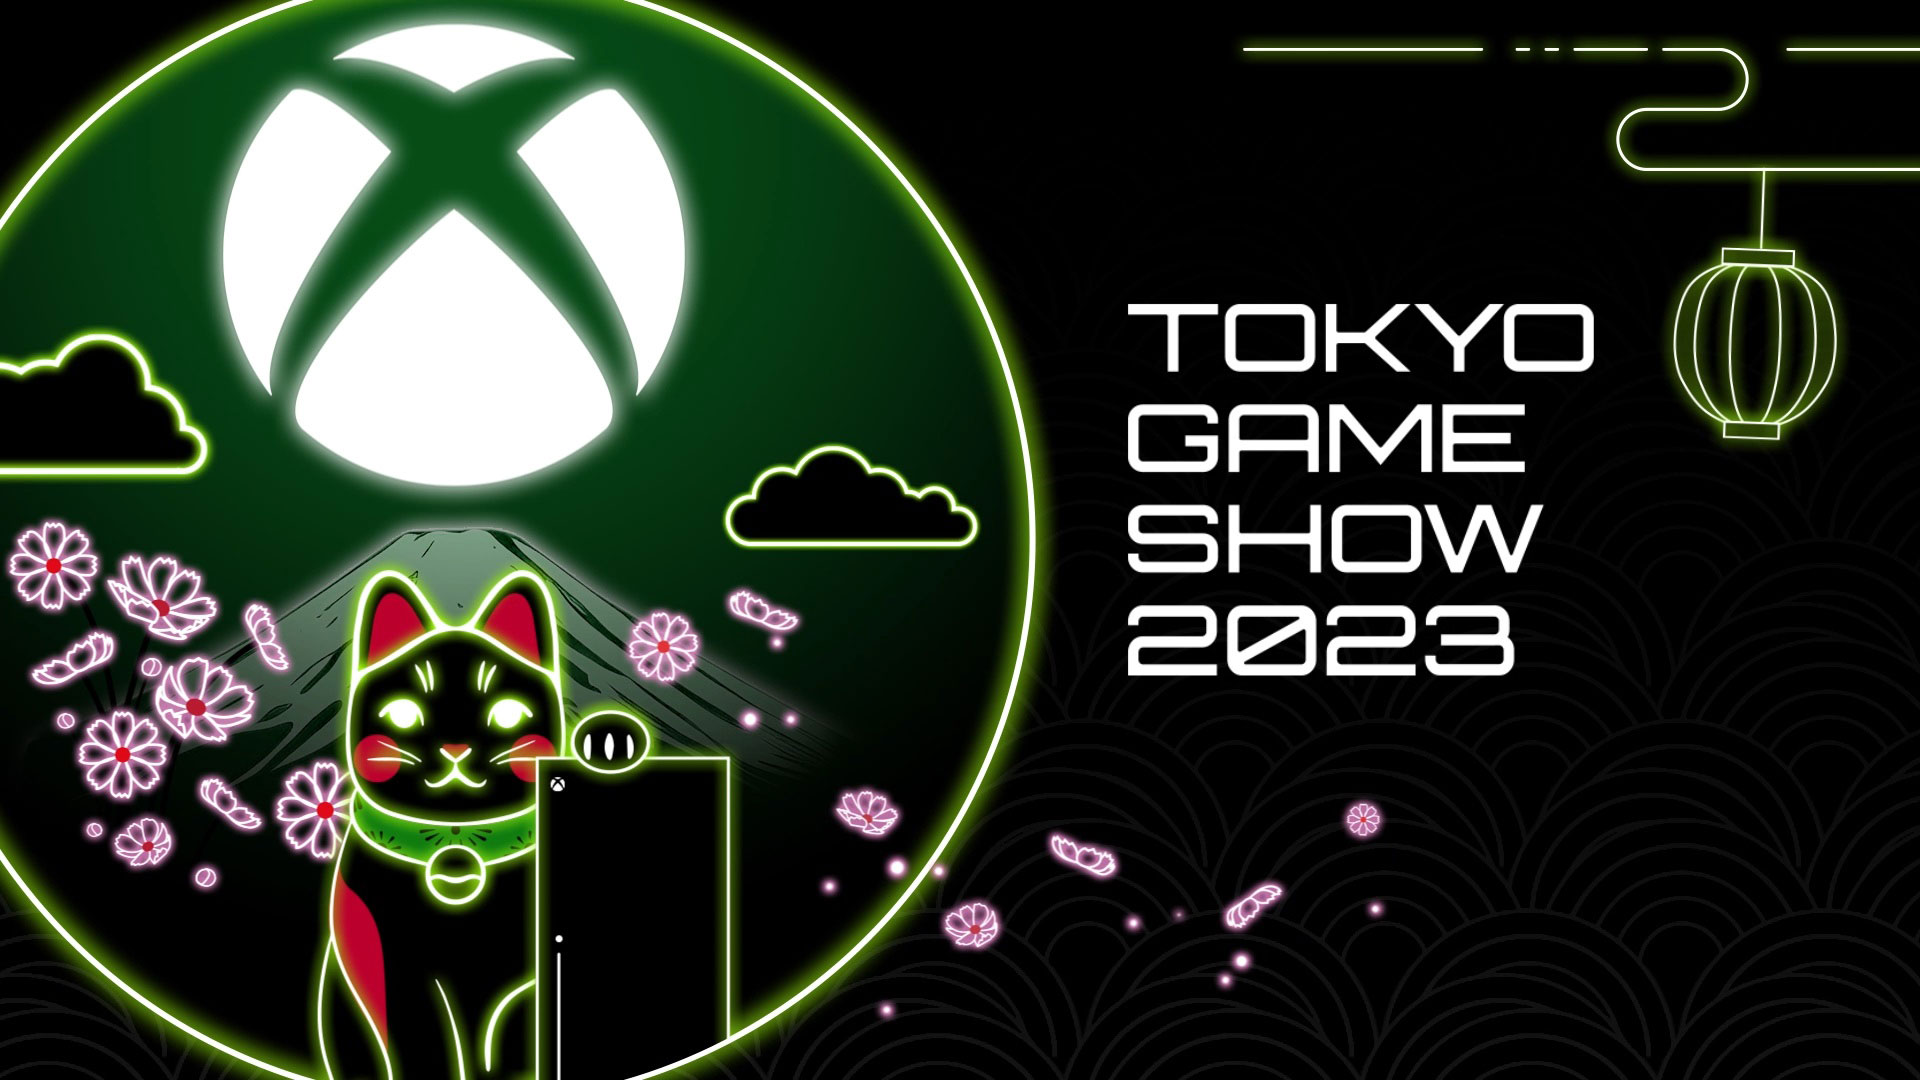 The Xbox Digital Broadcast will be returning to Tokyo Game Show on September 21